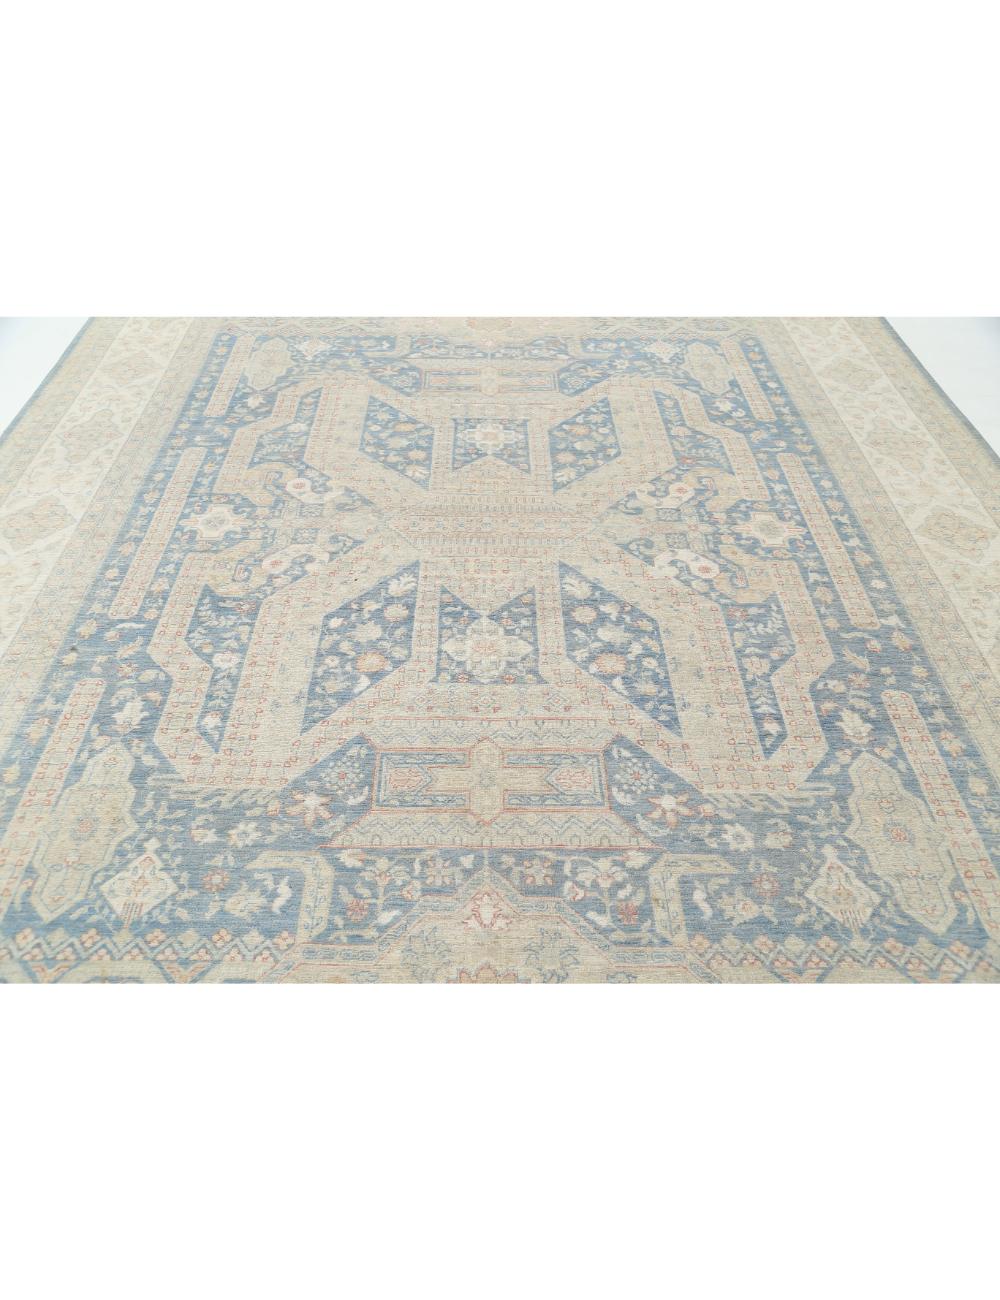 Serenity 10' 0" X 13' 4" Hand-Knotted Wool Rug 10' 0" X 13' 4" (305 X 406) / Blue / Ivory